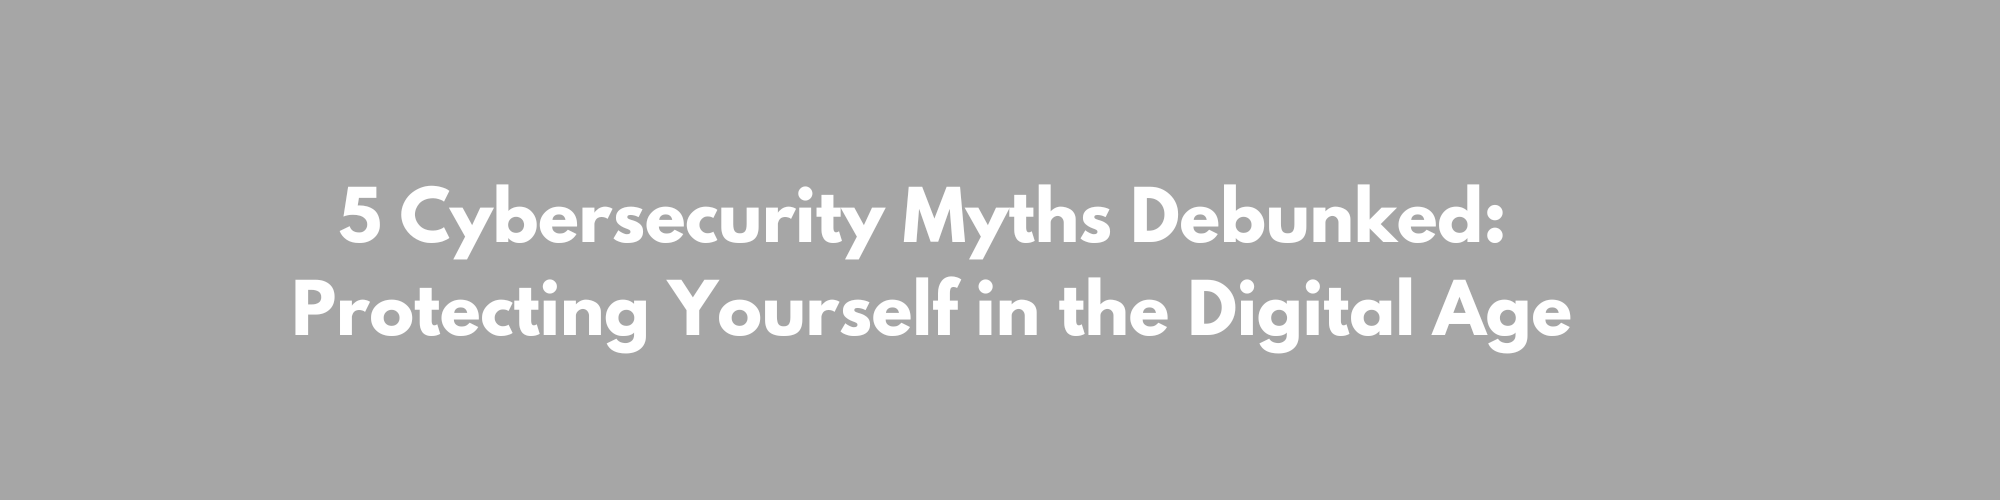 5 Cybersecurity Myths Debunked: Protecting Yourself in the Digital Age